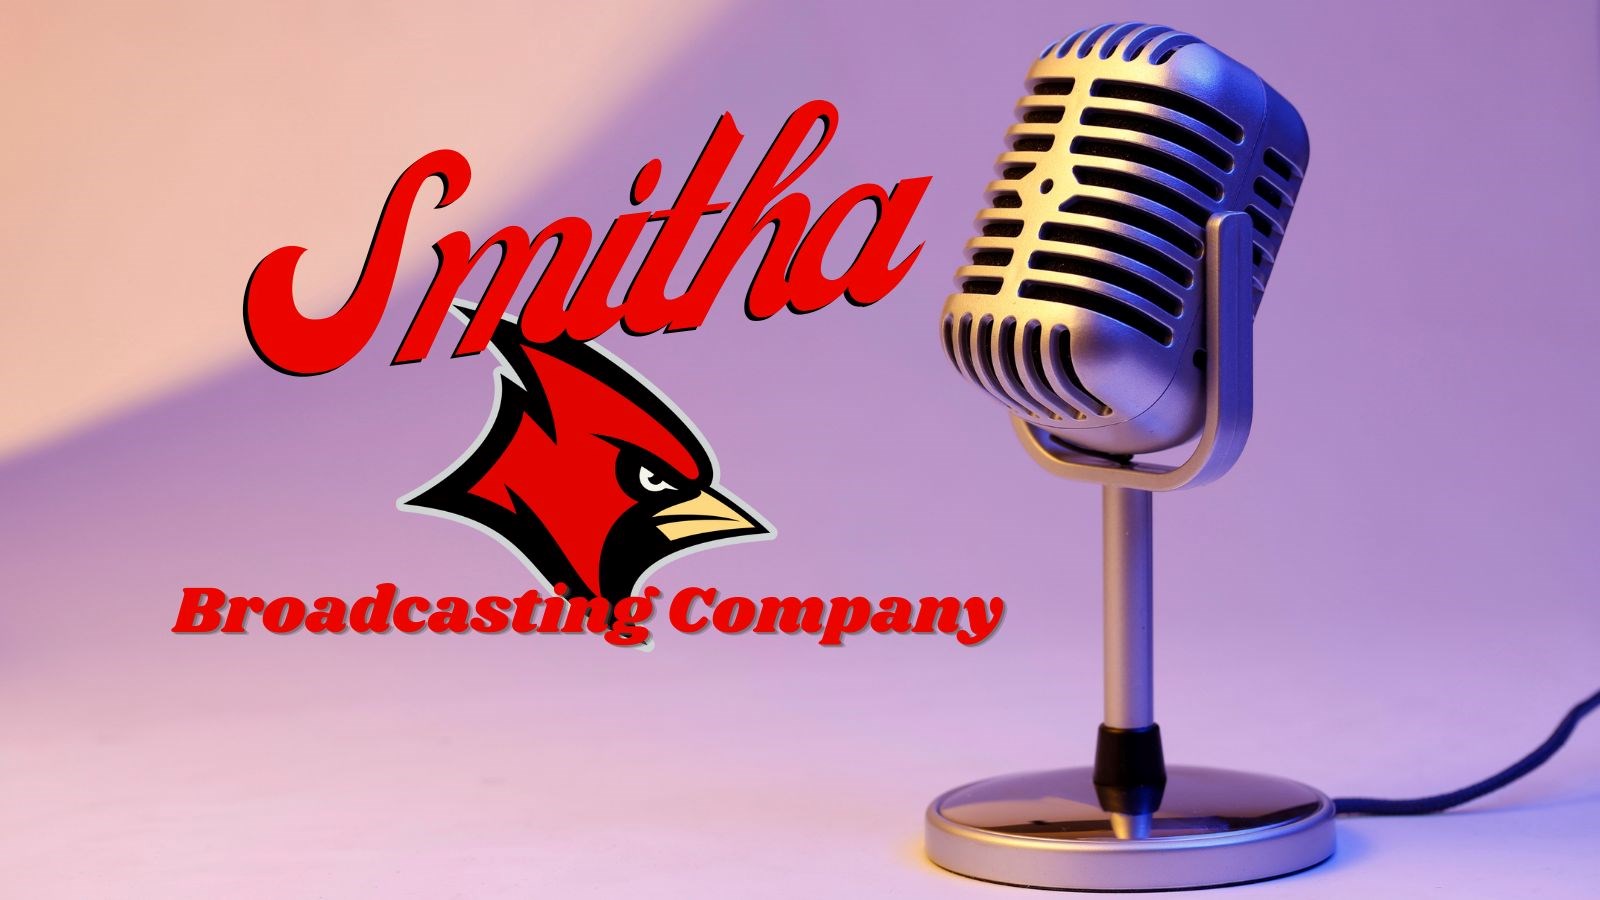 picture of a broadcast mic and the Smitha Broadcasting Company logo